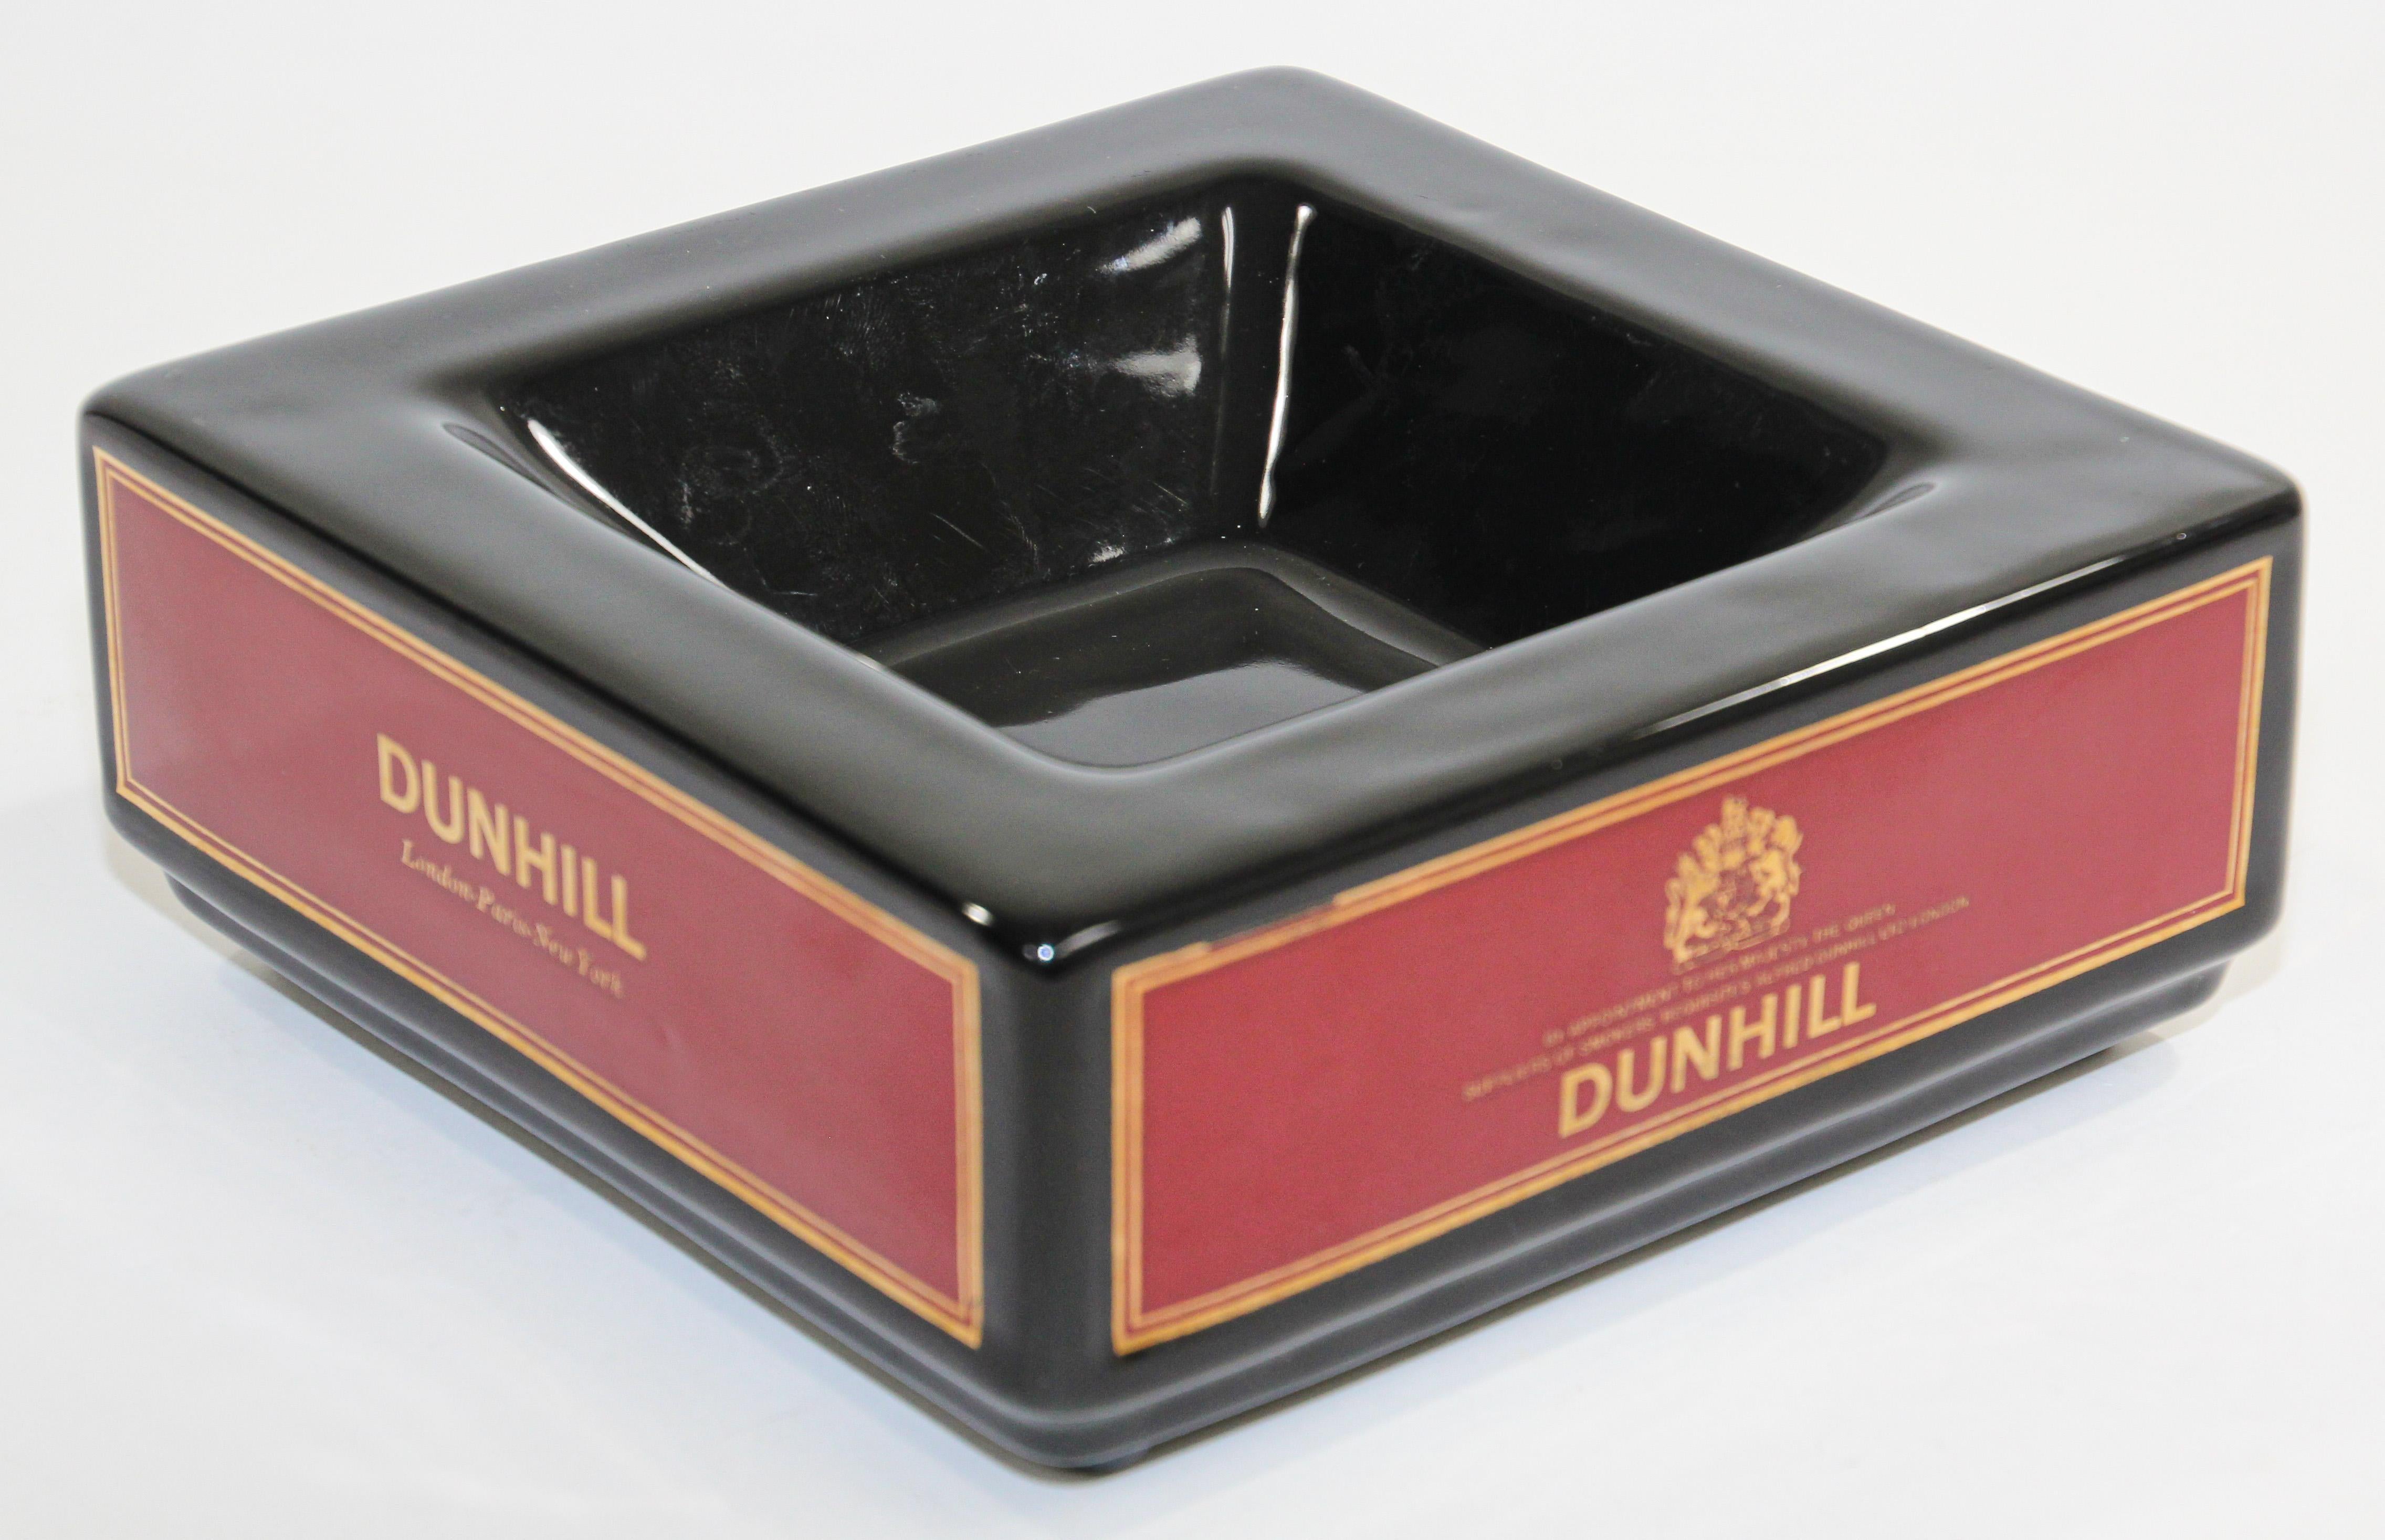 Large Vintage Dunhil ceramic square collectible ashtray by Wade England Royal red and black.
Vintage Alfred Dunhill collectible porcelain cigar ashtray by Wade, England.
Material: Glazed prestige porcelain with gold lettering on red borders.
Dunhill